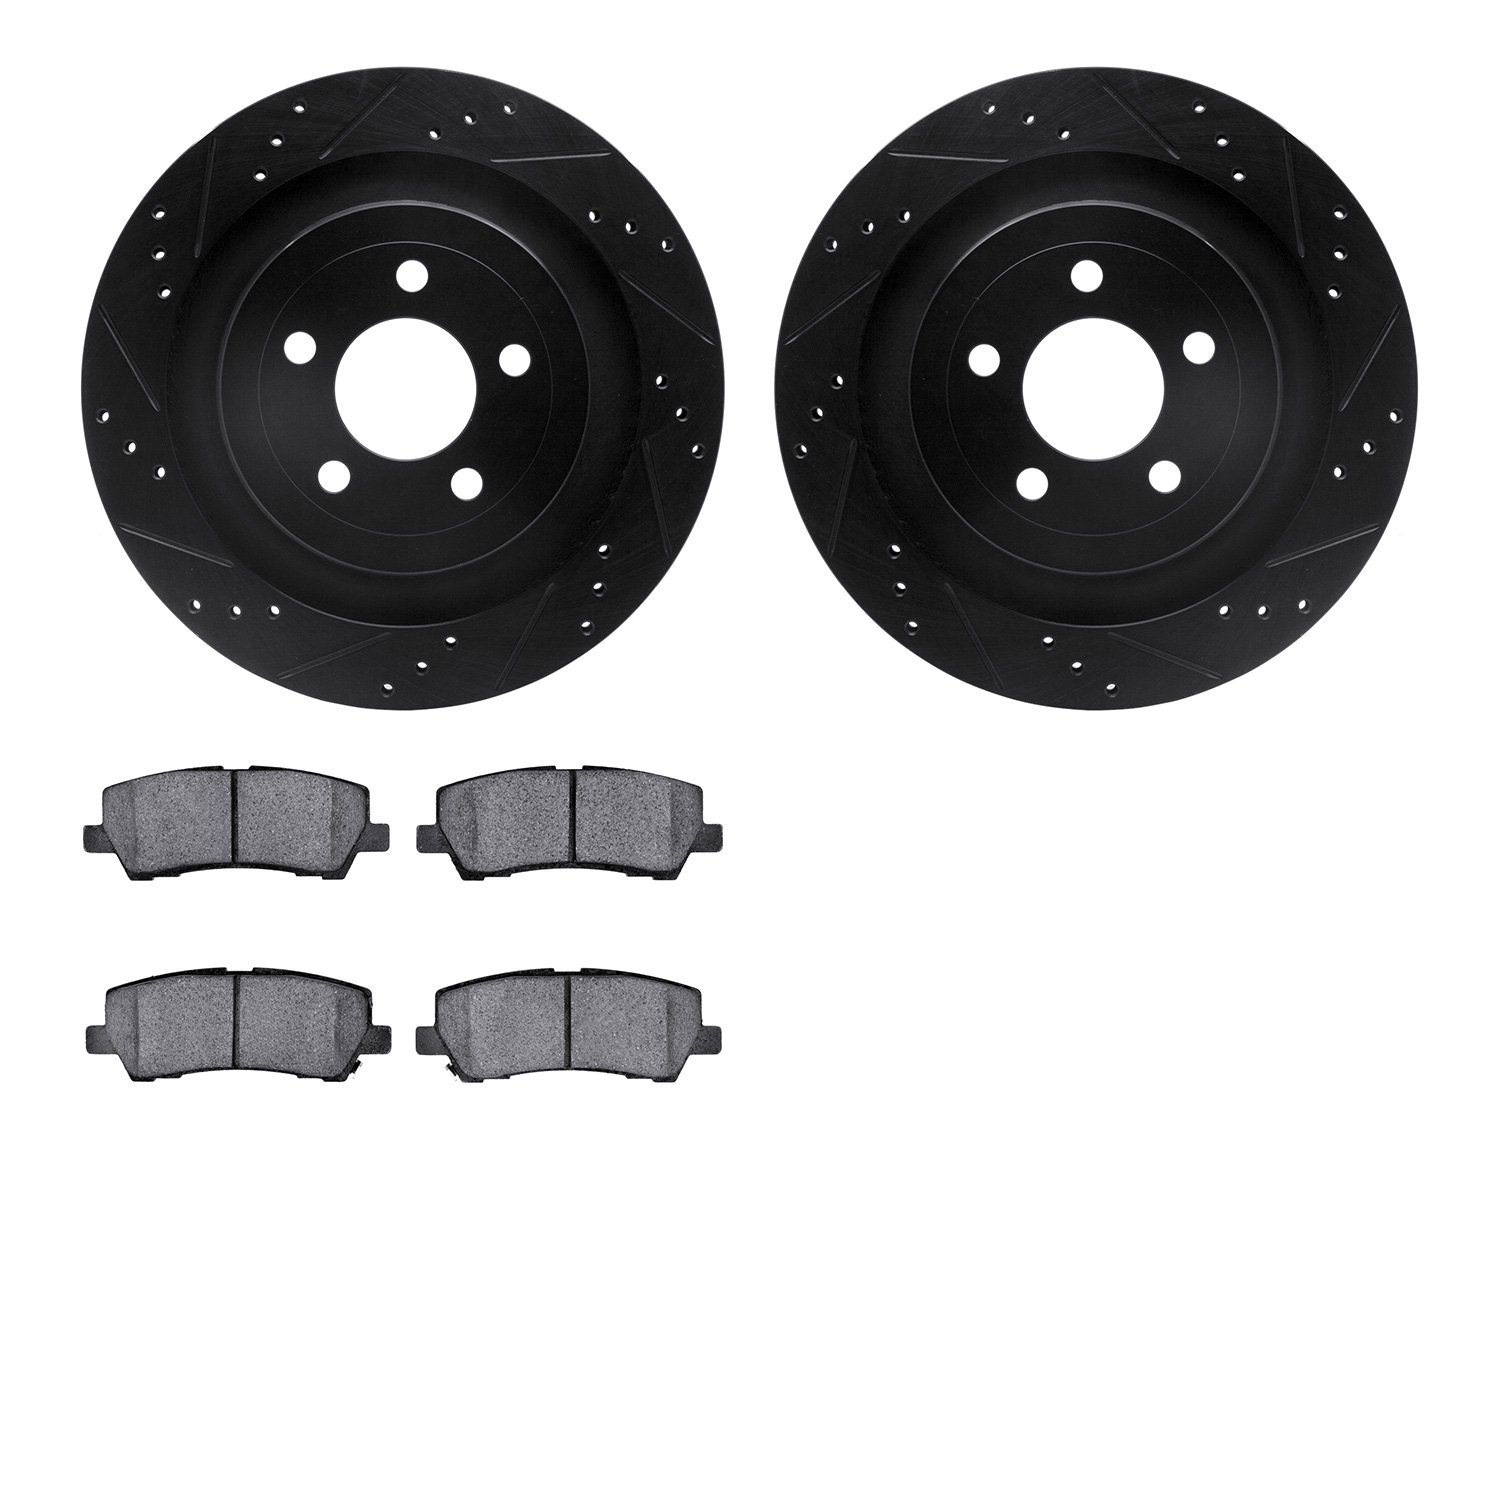 8302-54232 Drilled/Slotted Brake Rotors with 3000-Series Ceramic Brake Pads Kit [Black], Fits Select Ford/Lincoln/Mercury/Mazda,